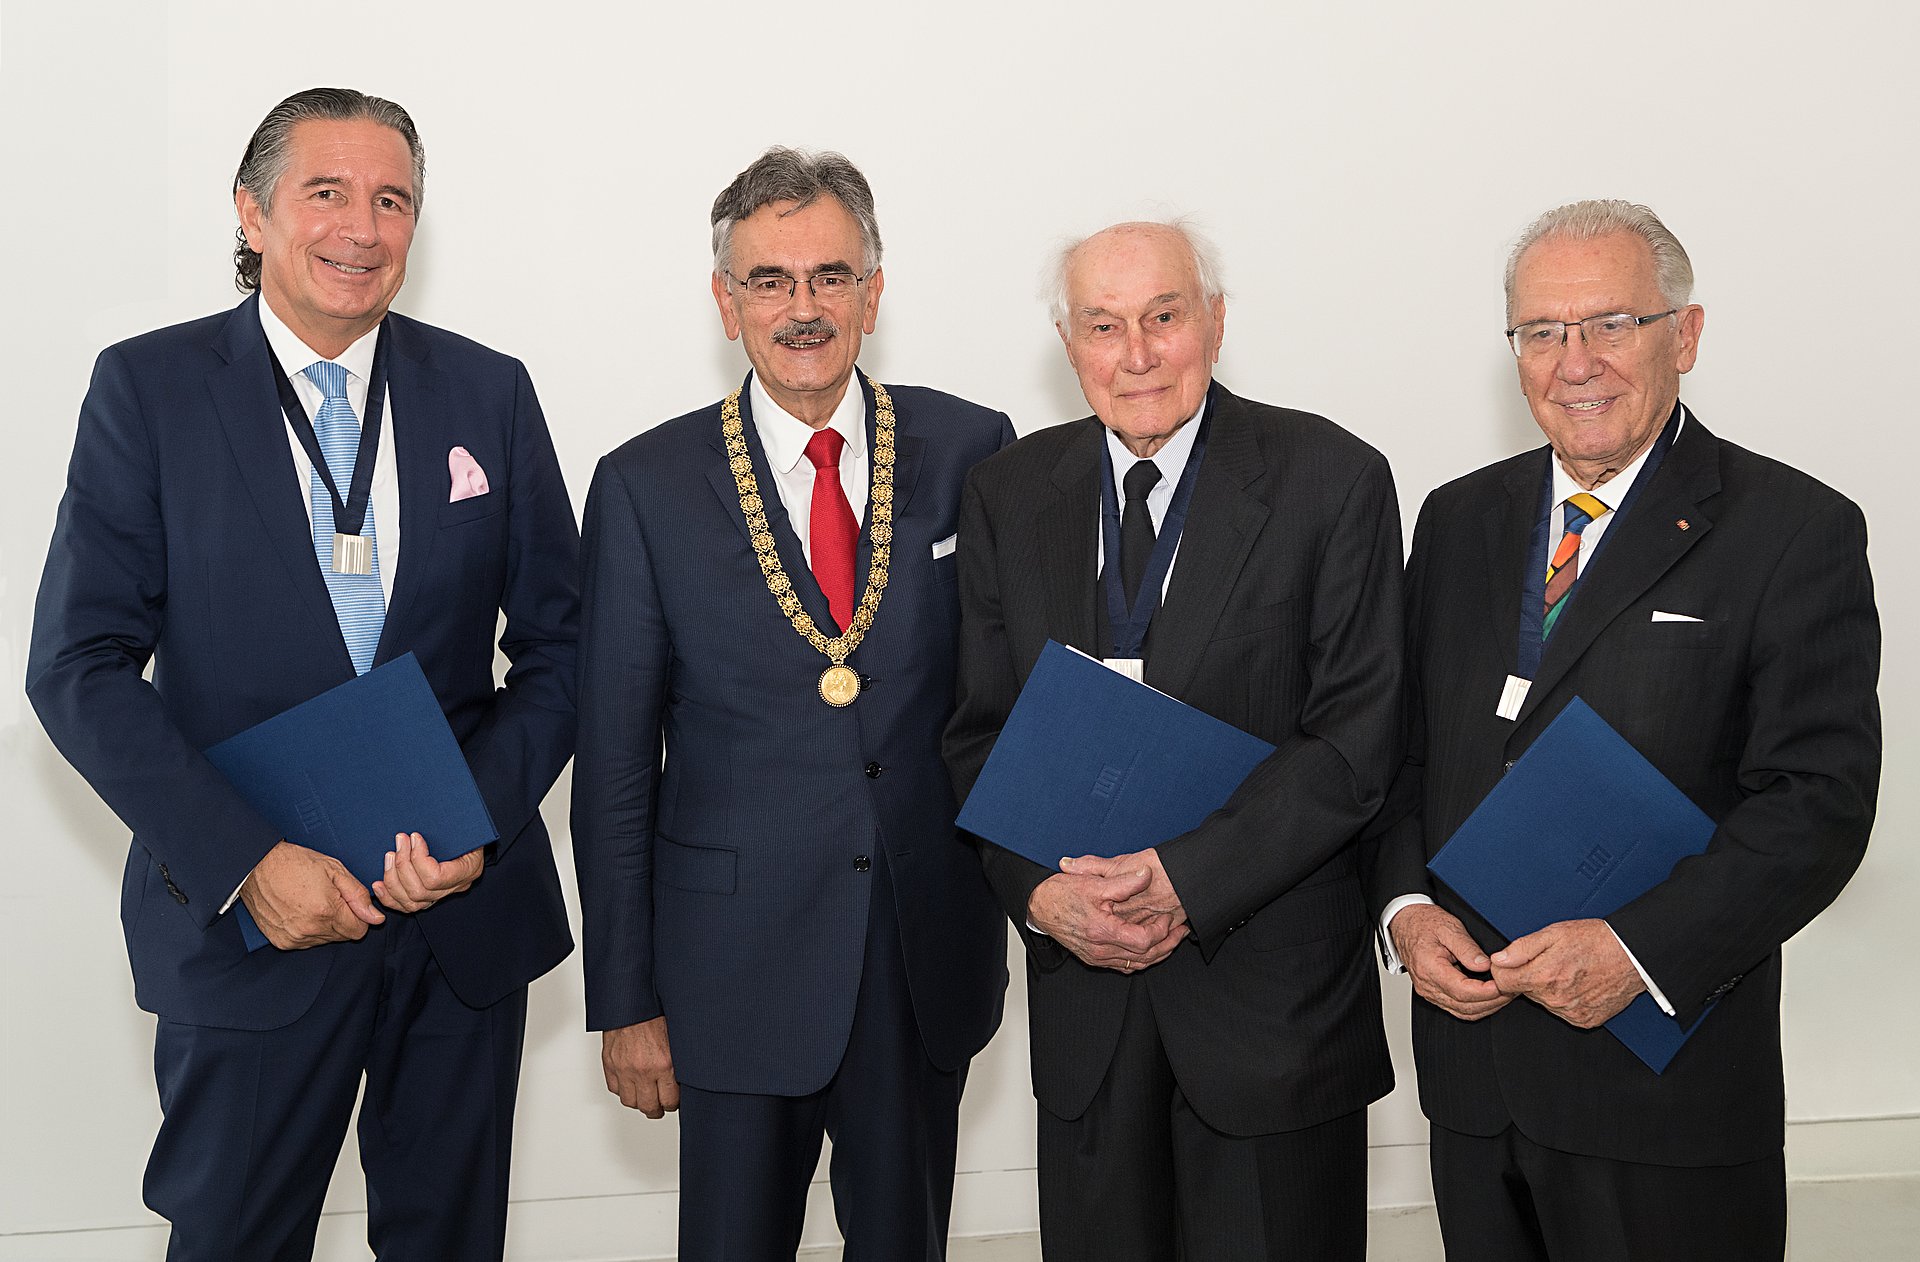 The three new honorary senators Dr. Urs Brunner, Prof. Gallus Rehm and Max Aicher (l.t.r). with TUM-president Wolfgang A. Herrmann (2.f.l.) (Picture: U. Benz / TUM)